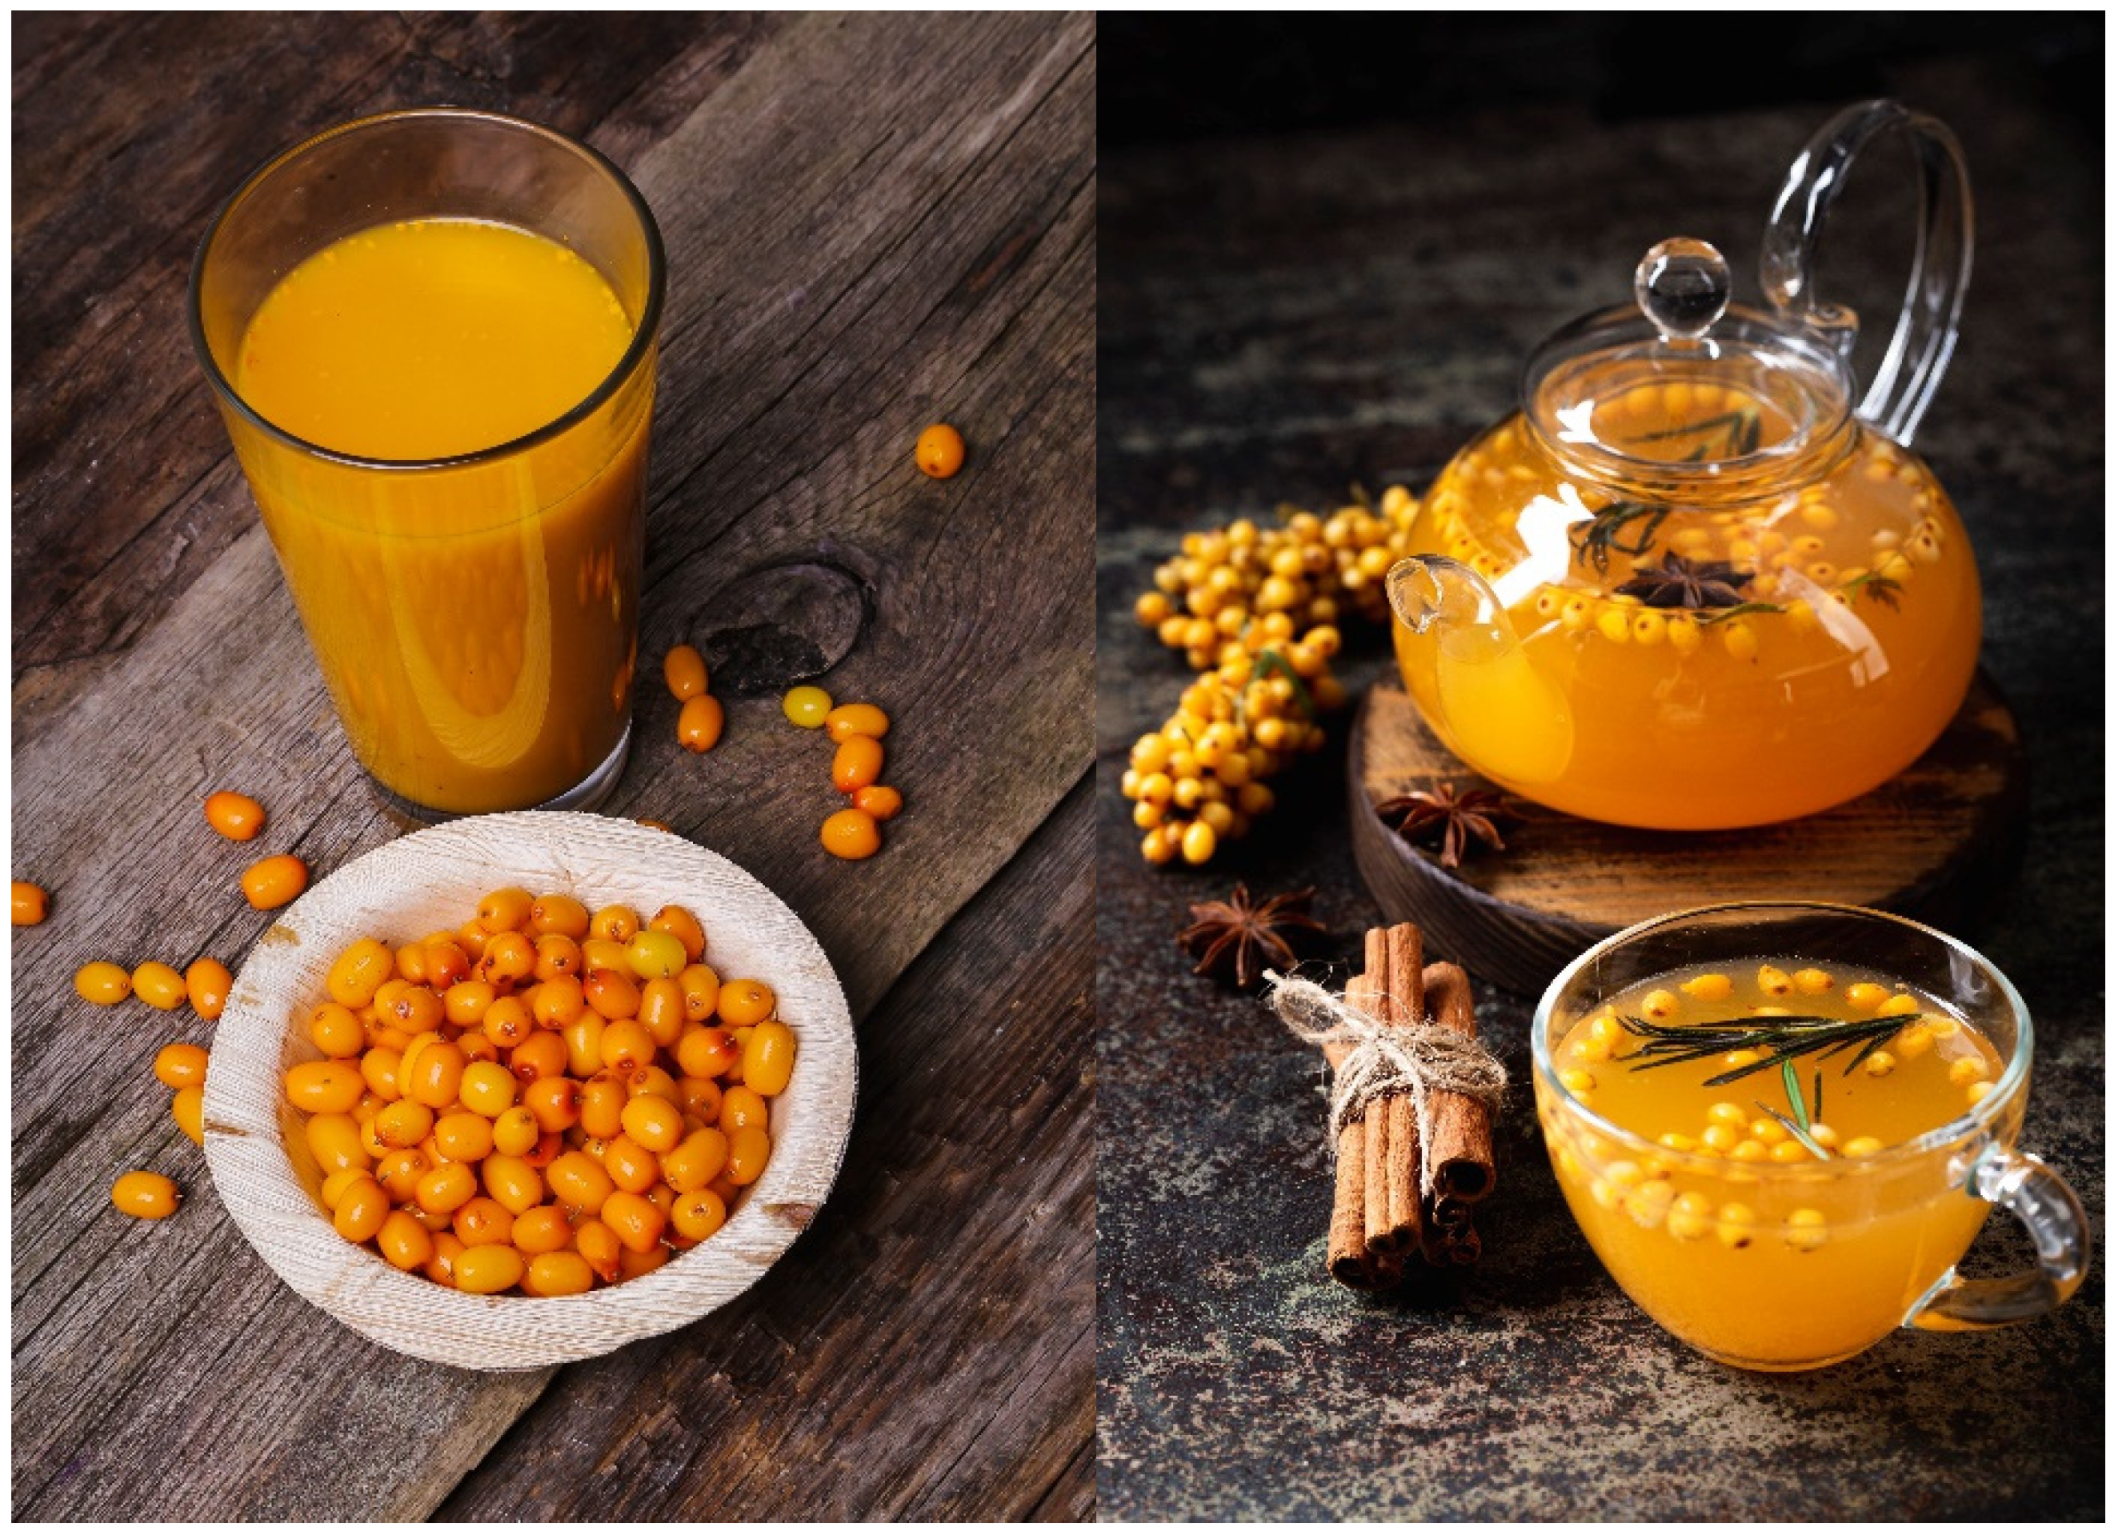 Antioxidants | Free Full-Text | Wide Spectrum of Active Compounds in Sea  Buckthorn (Hippophae rhamnoides) for Disease Prevention and Food Production  | HTML